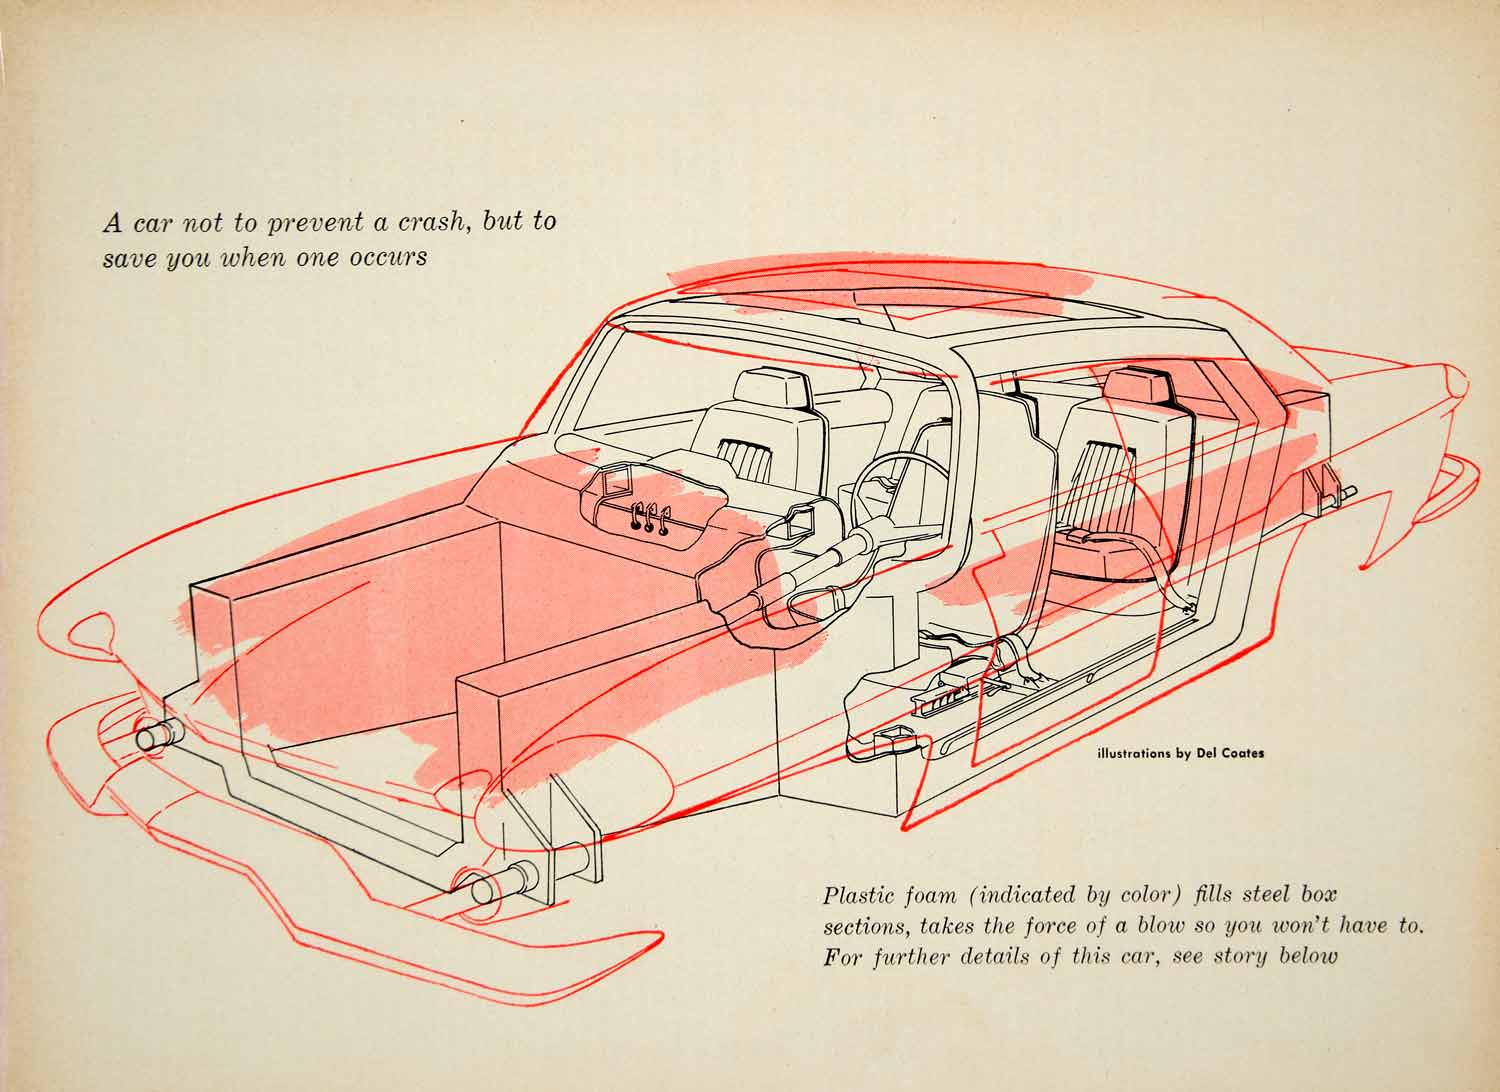 1955 Article Del Coates Art Classic Car Automobile Cross Section Safety YMT1